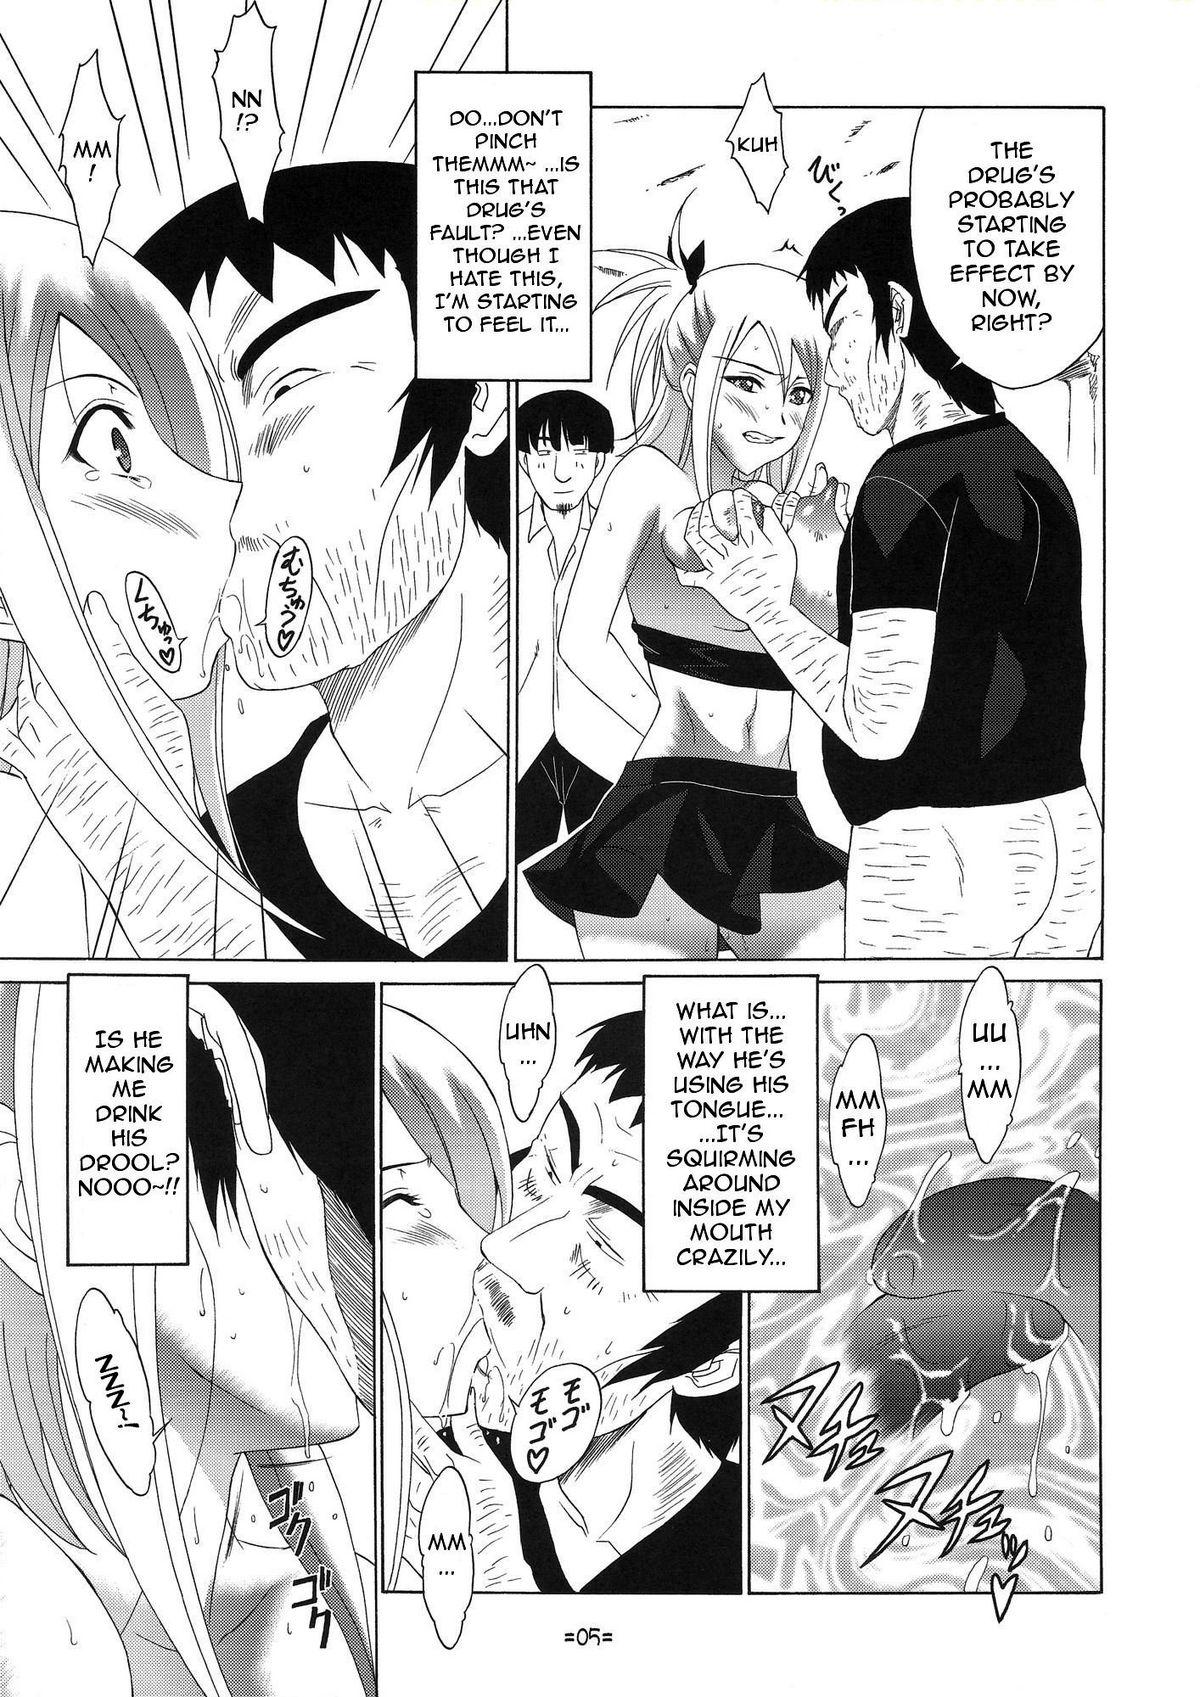 Asian Babes FAIRY SLAVE II - Fairy tail Cousin - Page 6